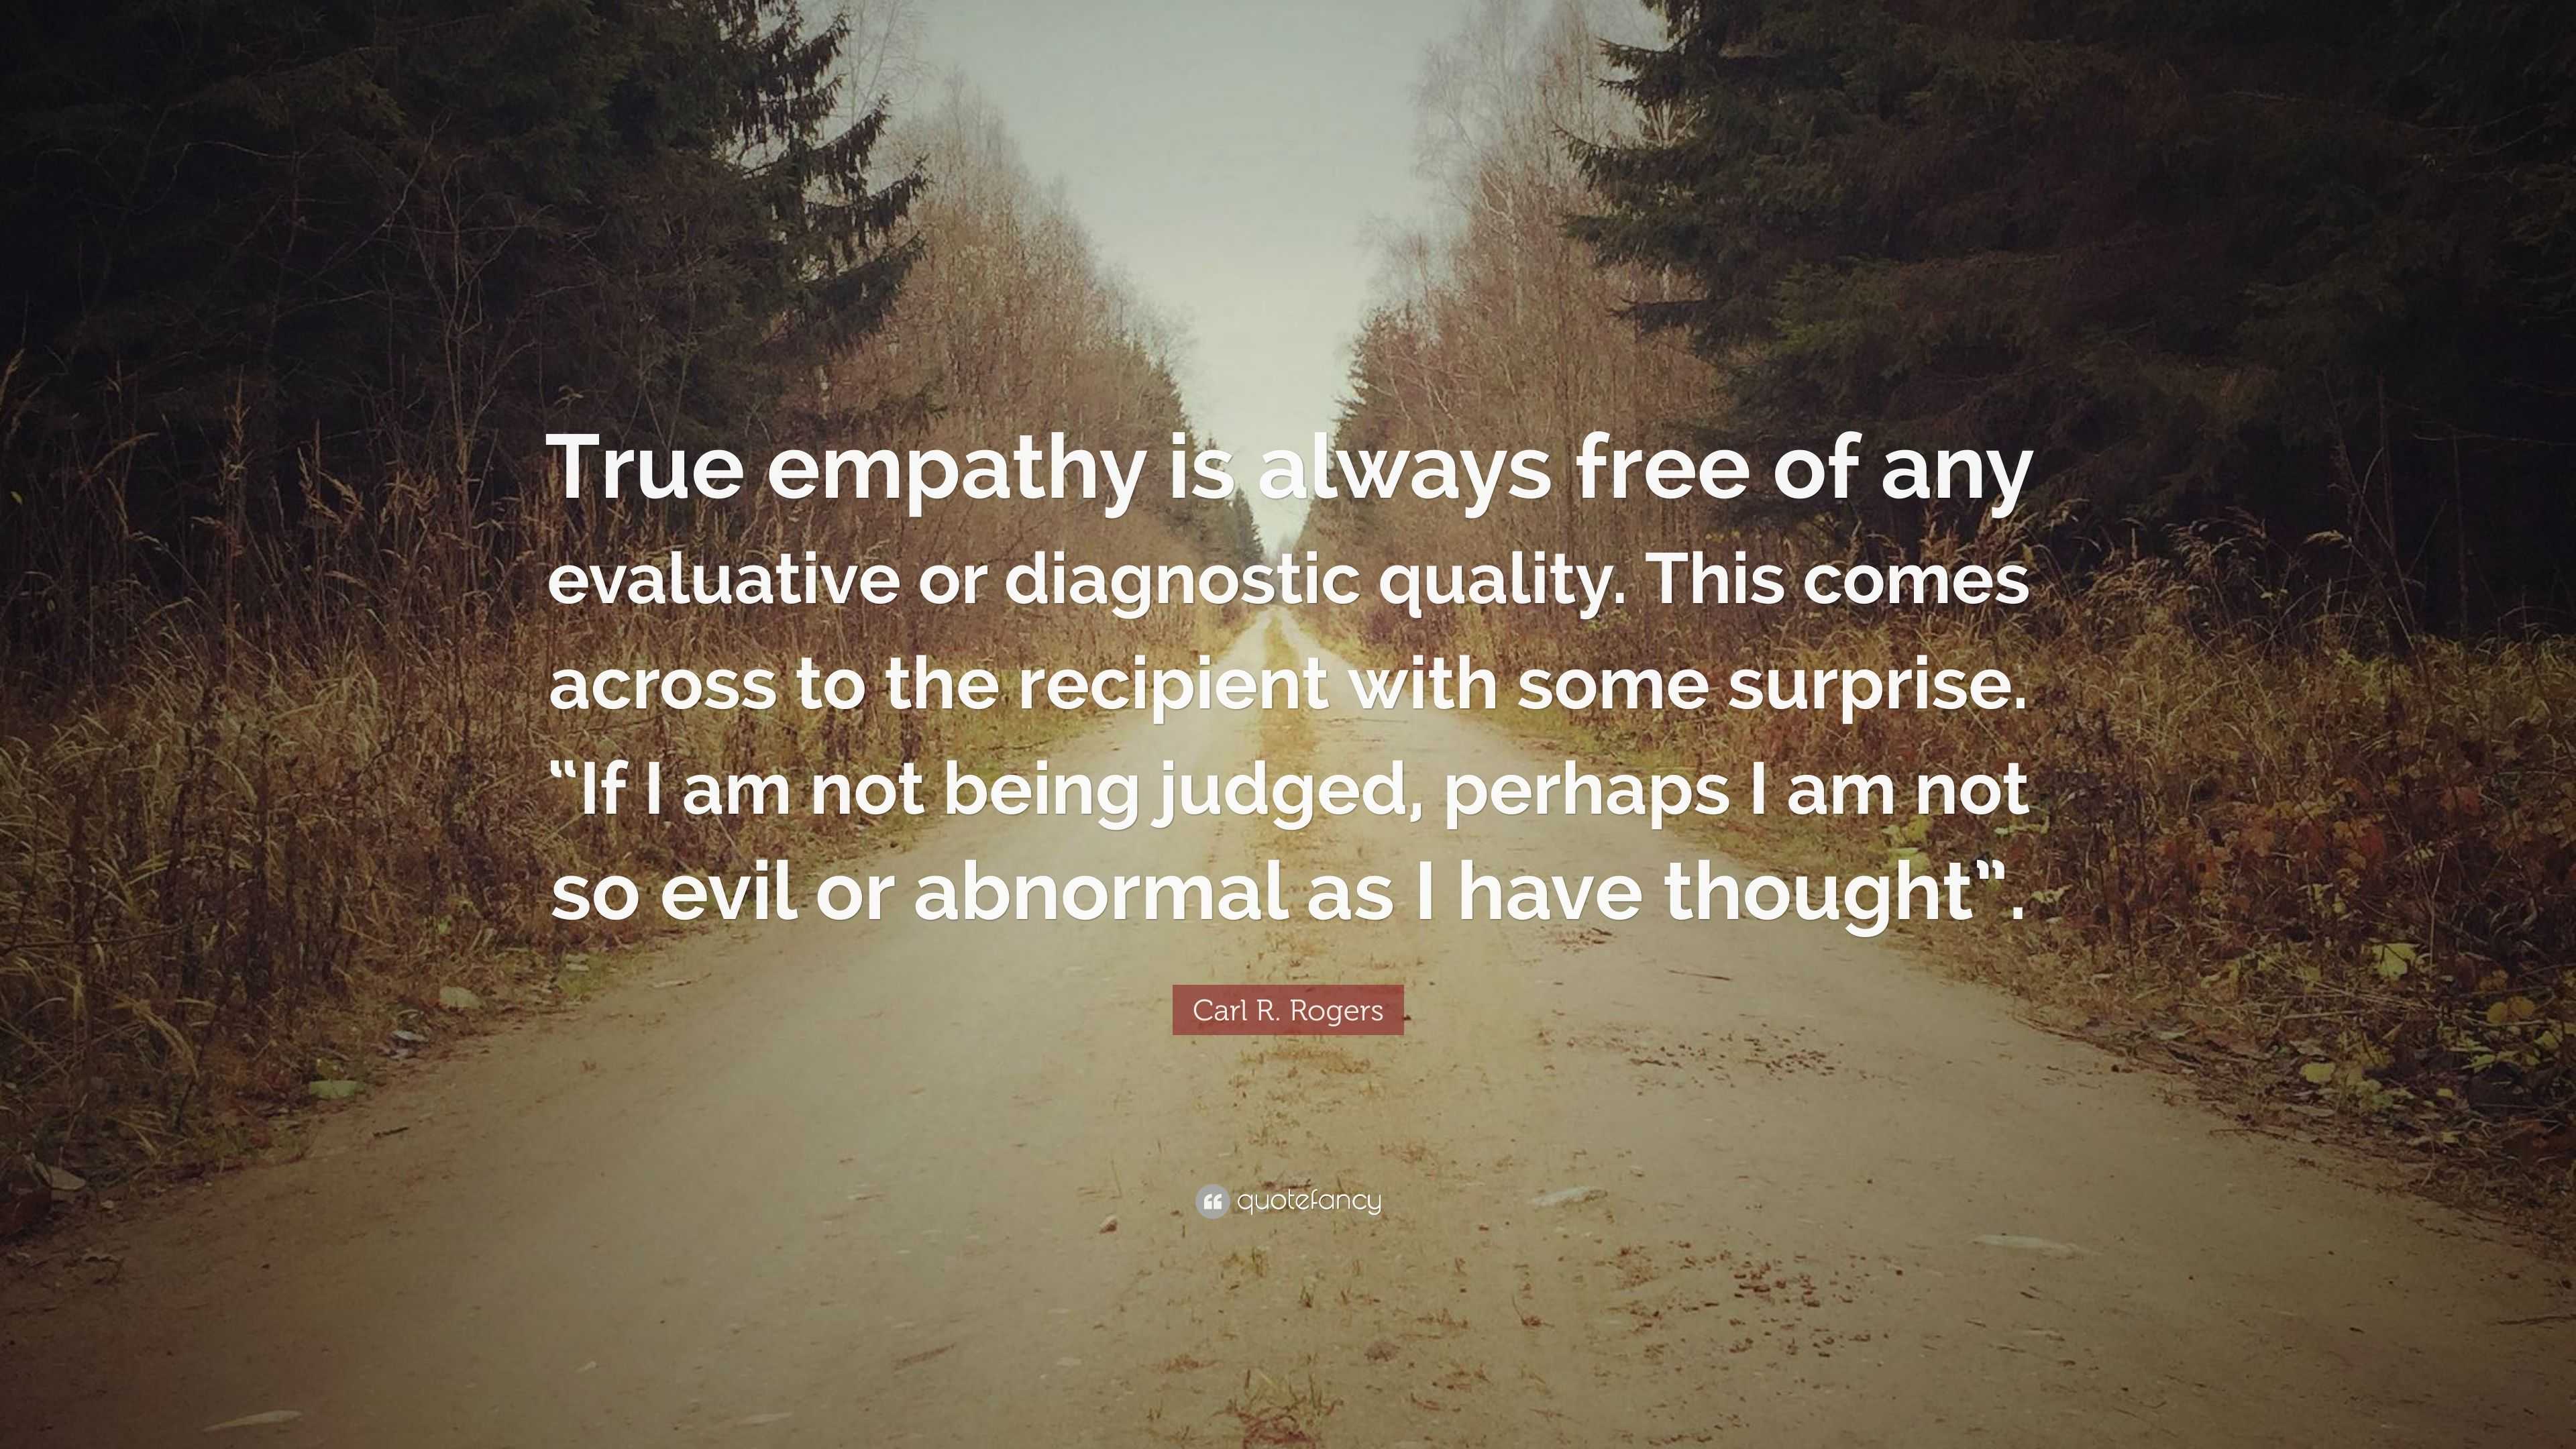 Carl R. Rogers Quote: “True empathy is always free of any evaluative or